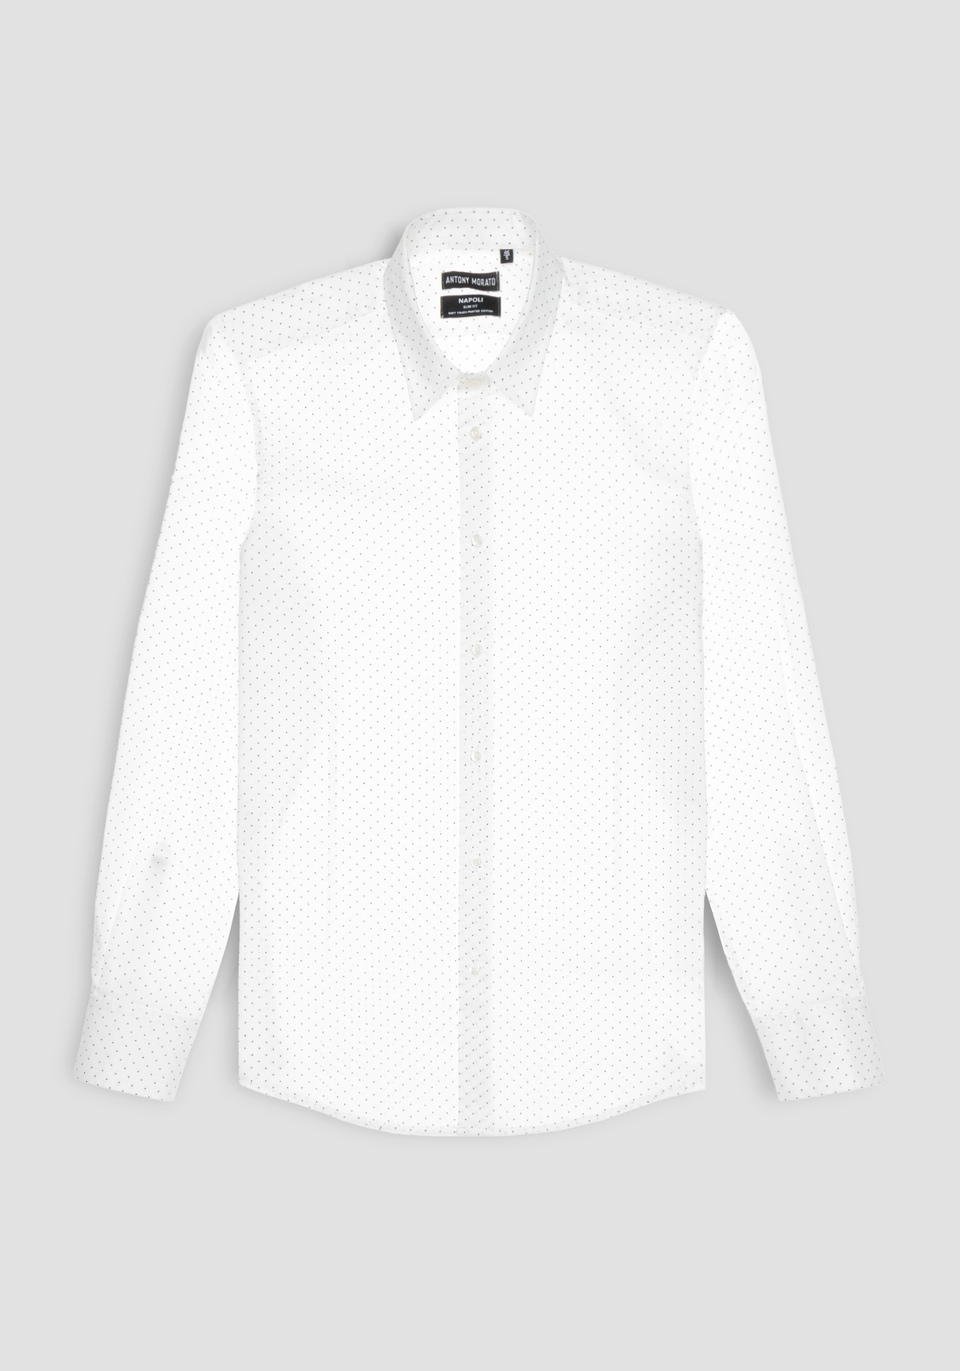 NAPOLI SLIM FIT SHIRT IN PURE SOFT TOUCH COTTON WITH ALL-OVER MICROPRINT - Antony Morato Online Shop